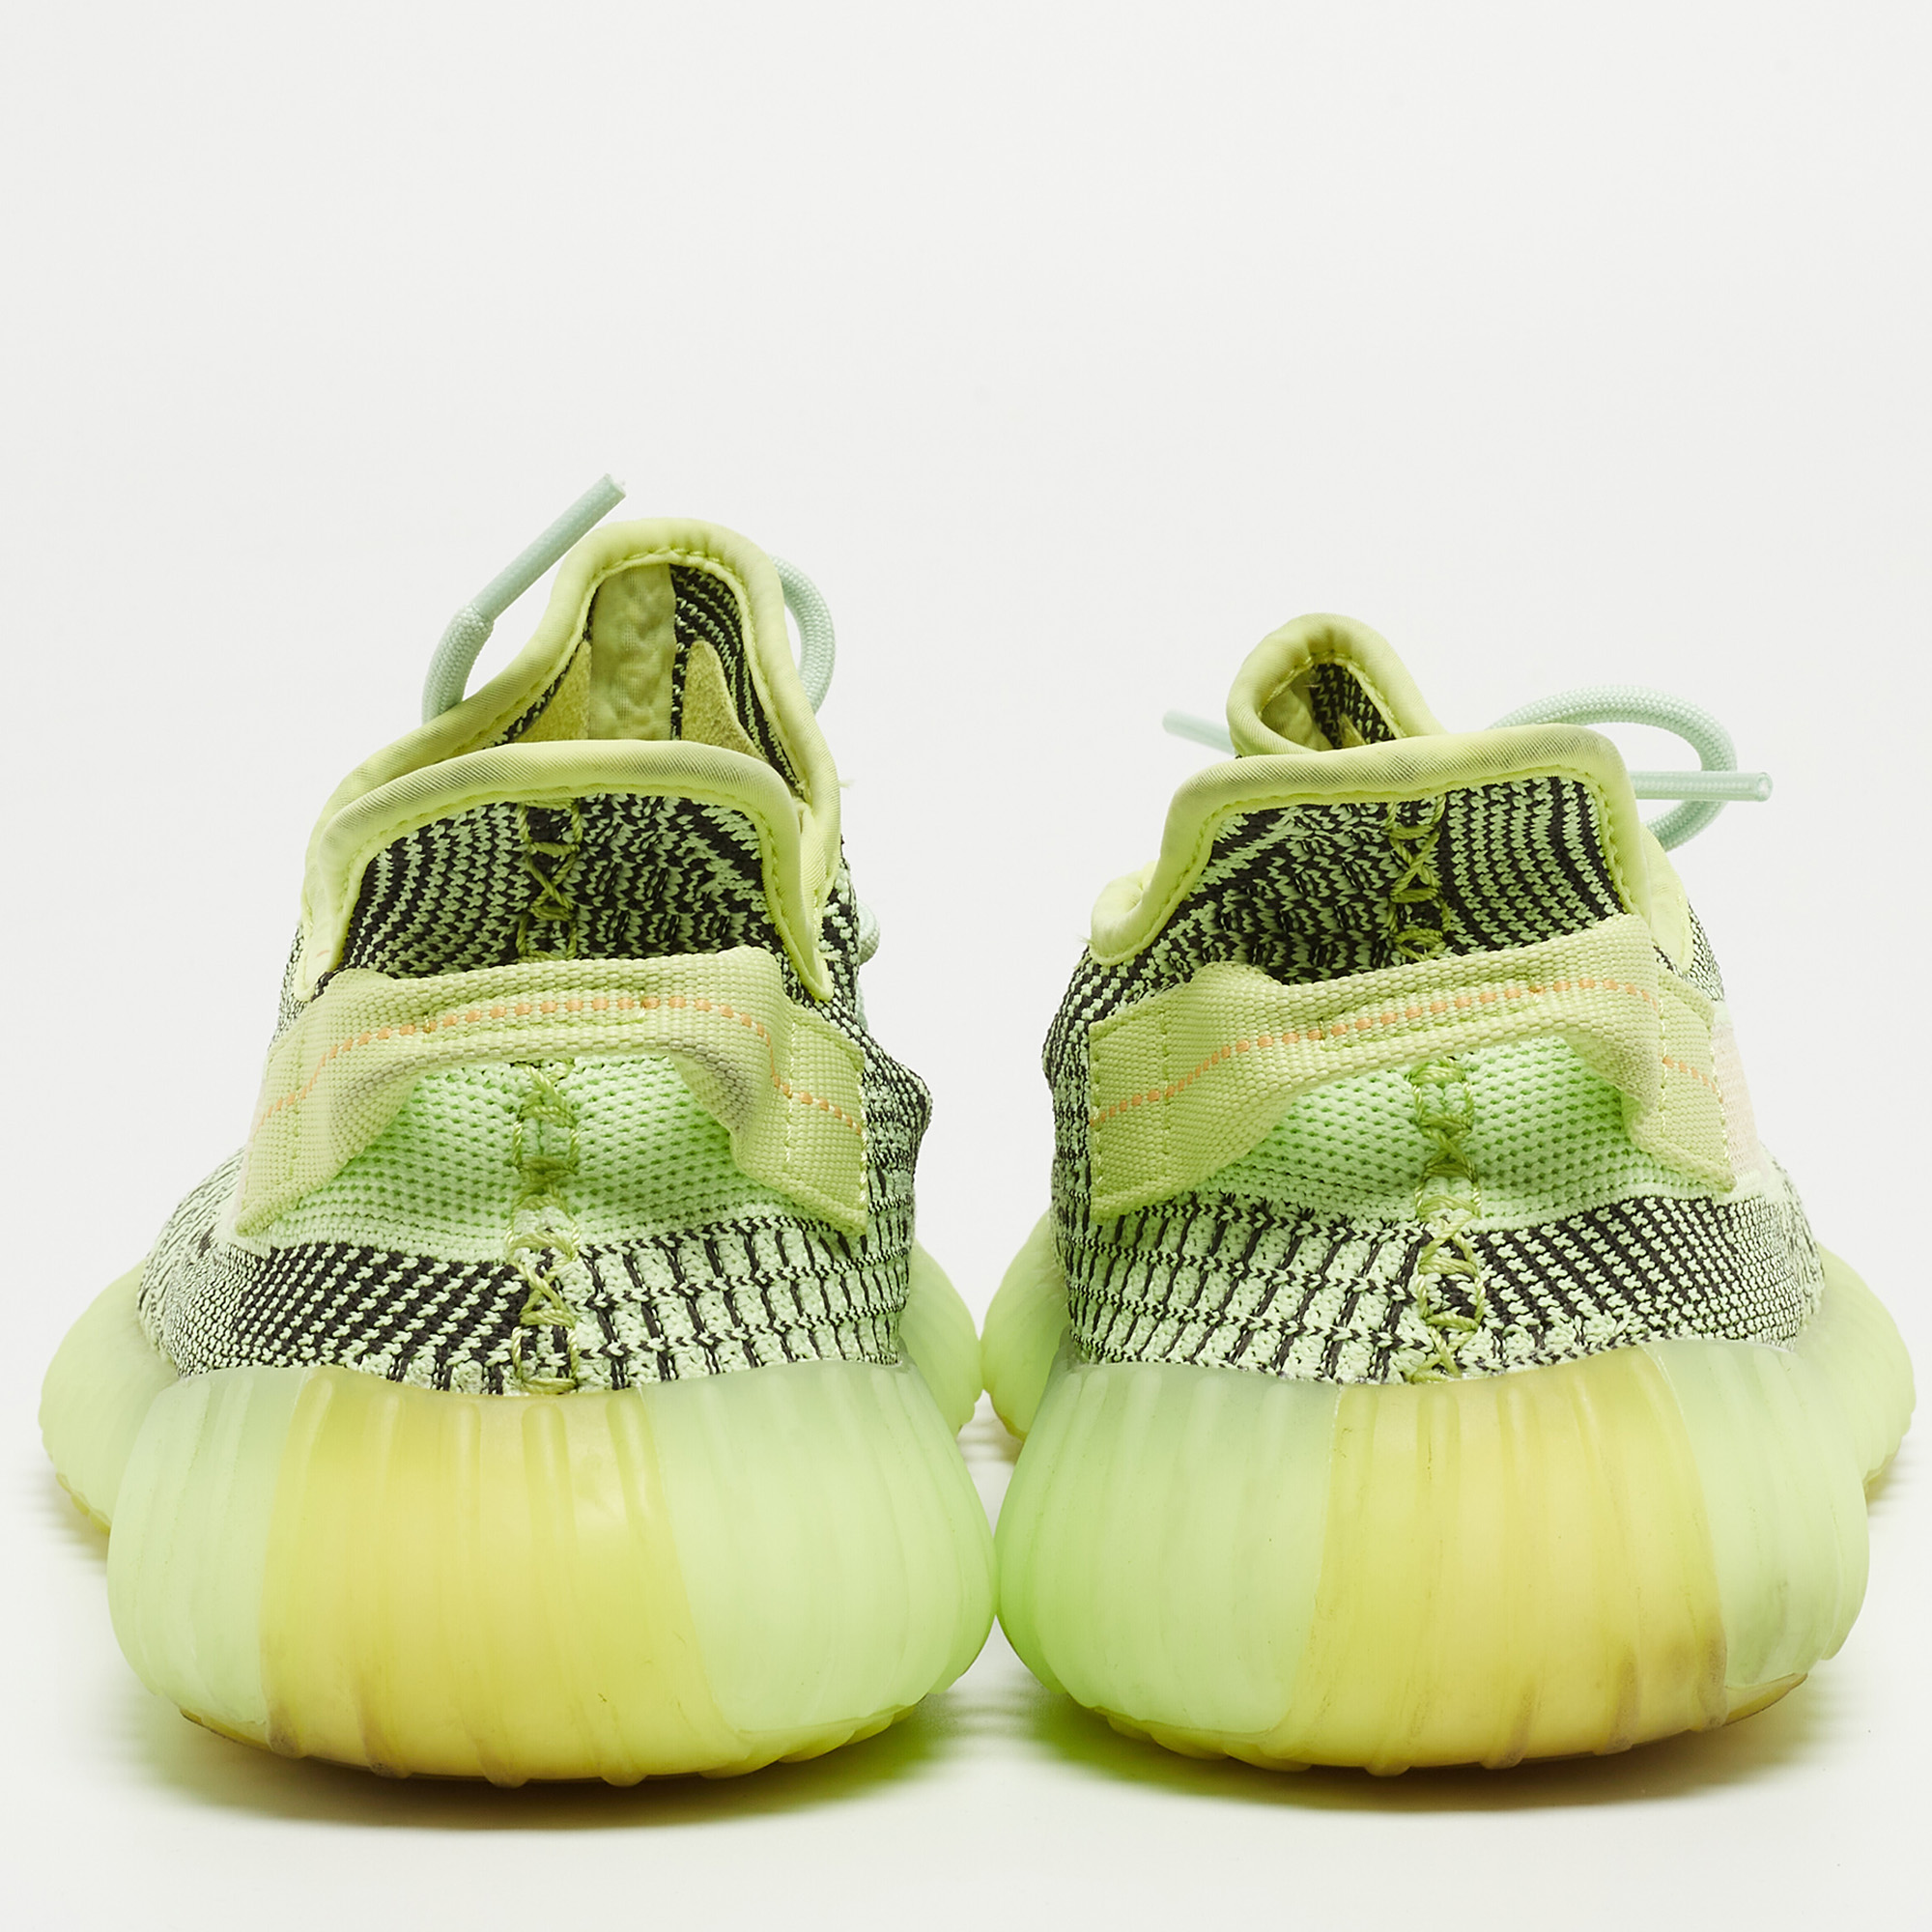 Yeezy X Adidas Neon Green Knit Fabric Boost 350 V2 Yeezreel (Non Reflective) Sneakers Size 44 2/3